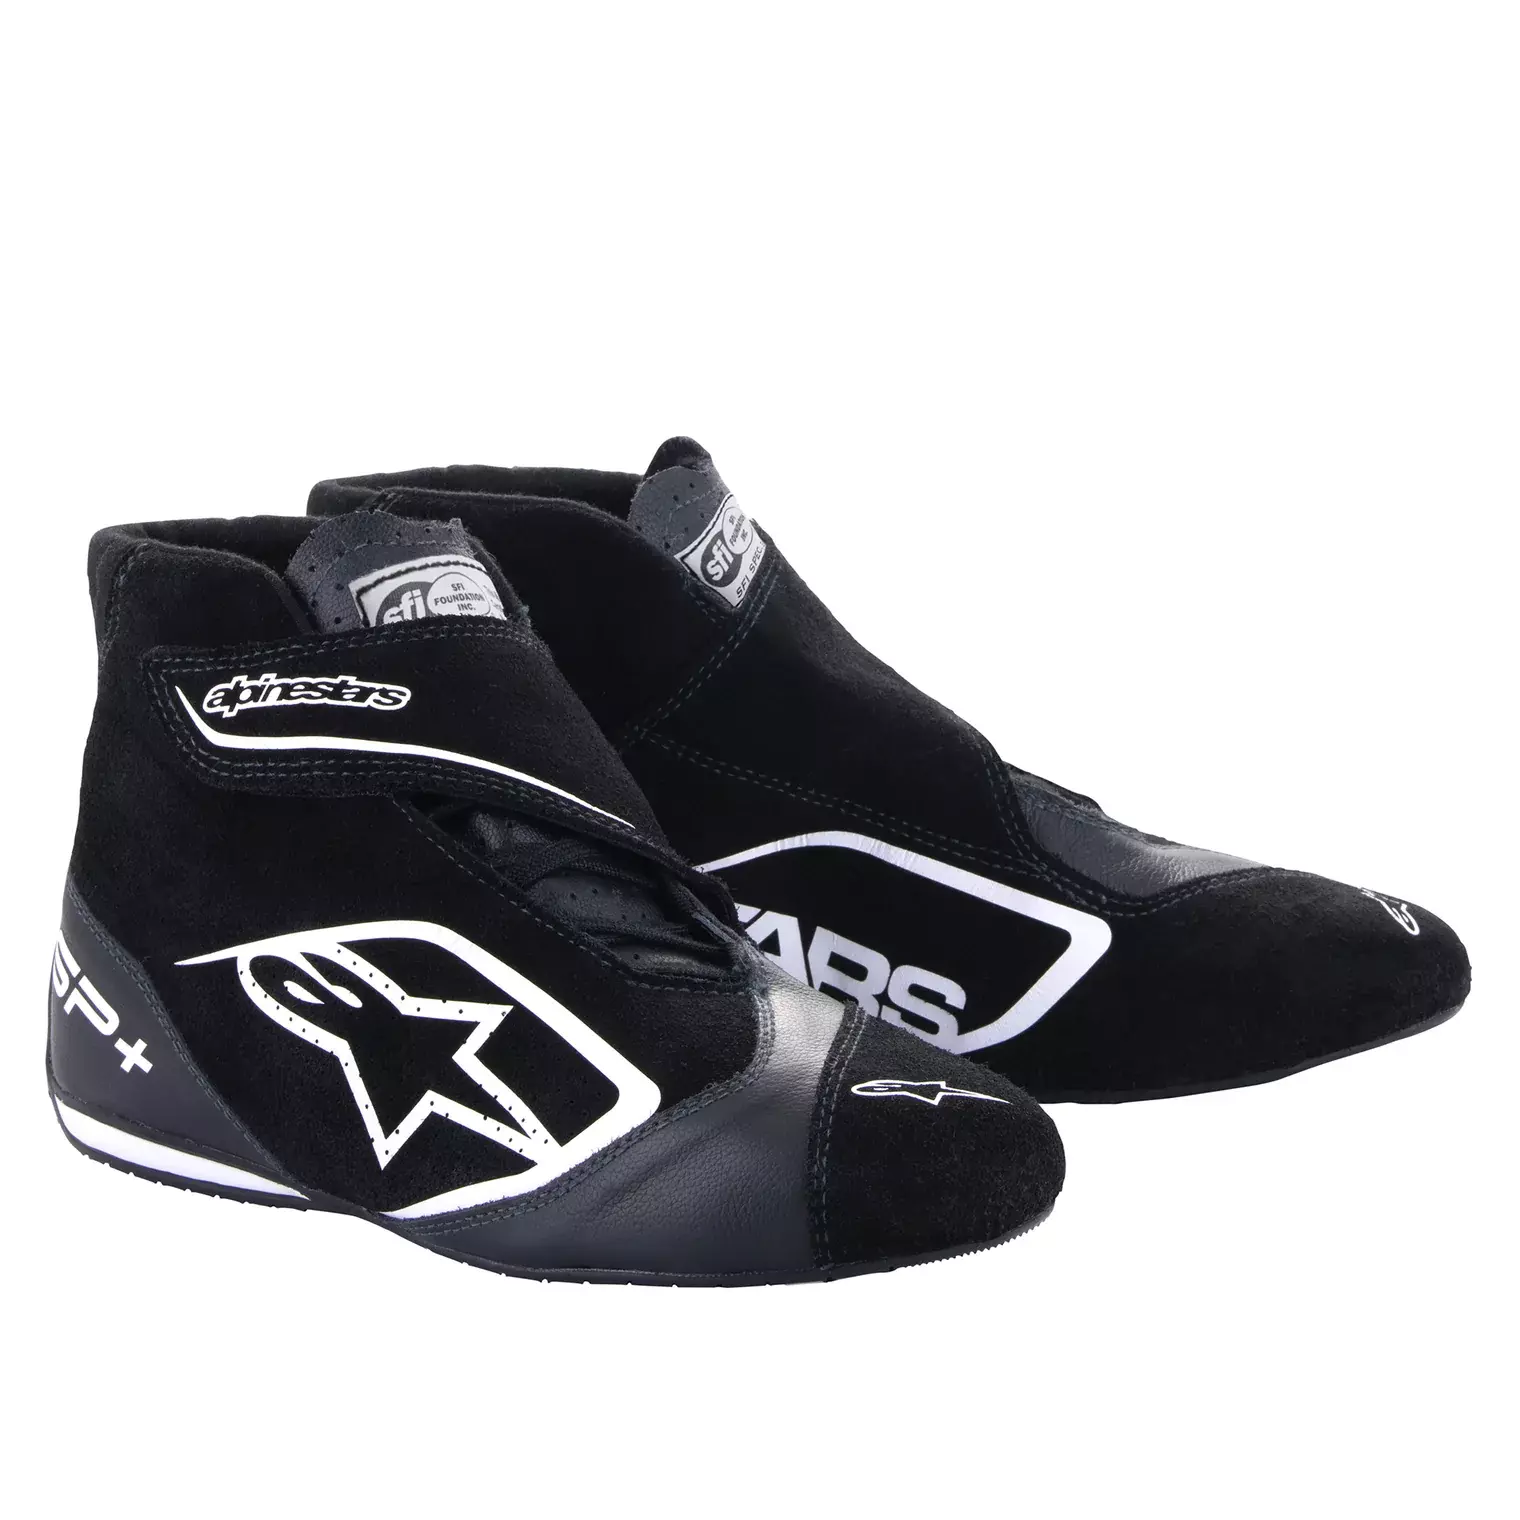 Alpinestars 2710823-12-13 Driving Shoe, SP+, Mid-Top, SFI 3.3, FIA Approved, Suede Outer, Nomex Inner, Black / White, Size 13, Pair